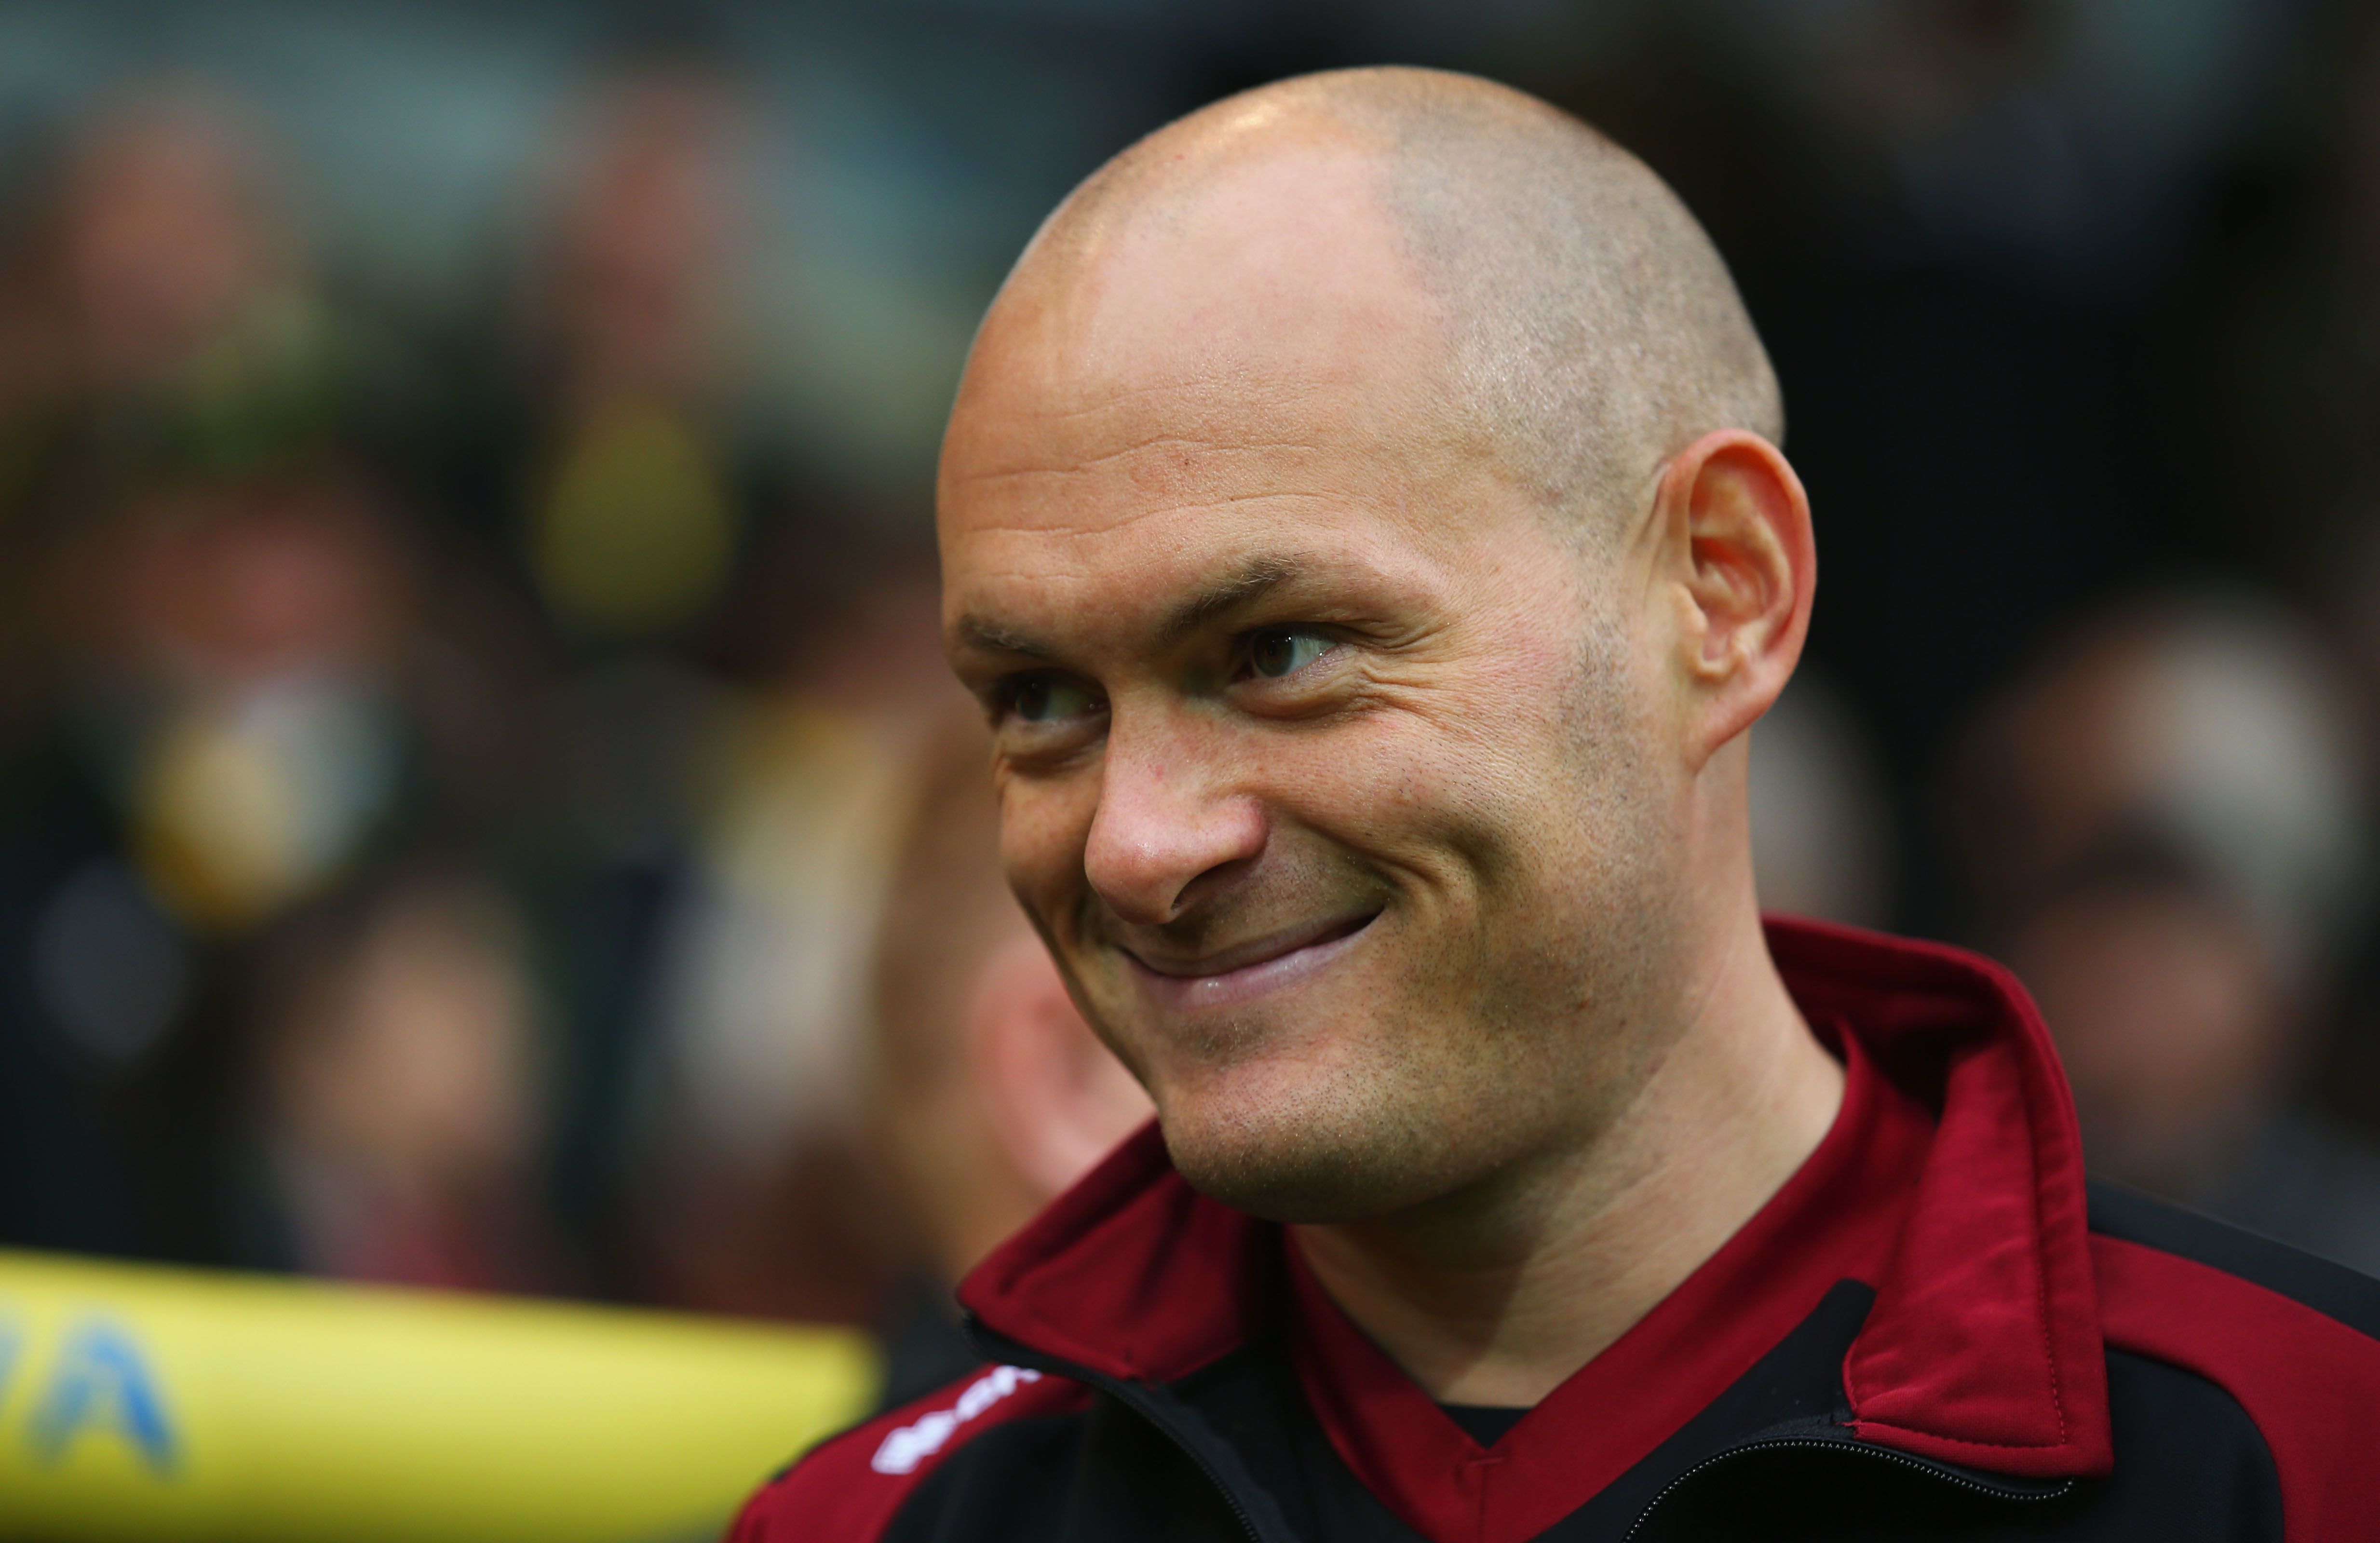 NORWICH, ENGLAND - OCTOBER 24: Alex Neil Manager of Norwich City looks on prior to the Barclays Premier League match between Norwich City and West Bromwich Albion at Carrow Road on October 24, 2015 in Norwich, England. (Photo by Bryn Lennon/Getty Images)